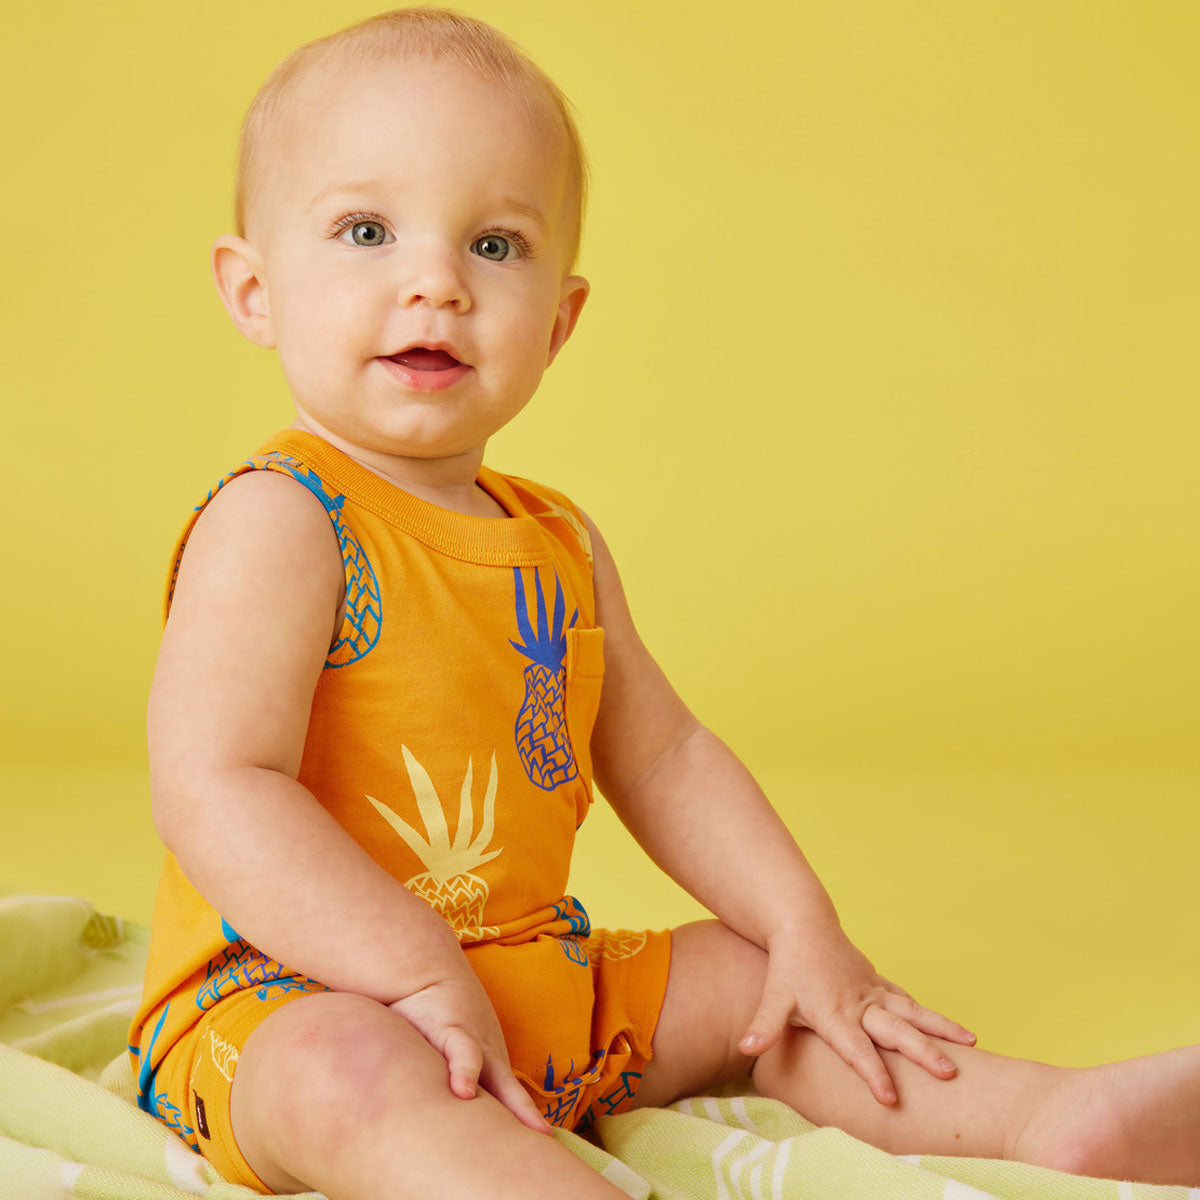 Tea Collection Pocket Tank Baby Romper - Pineapples in Portugal